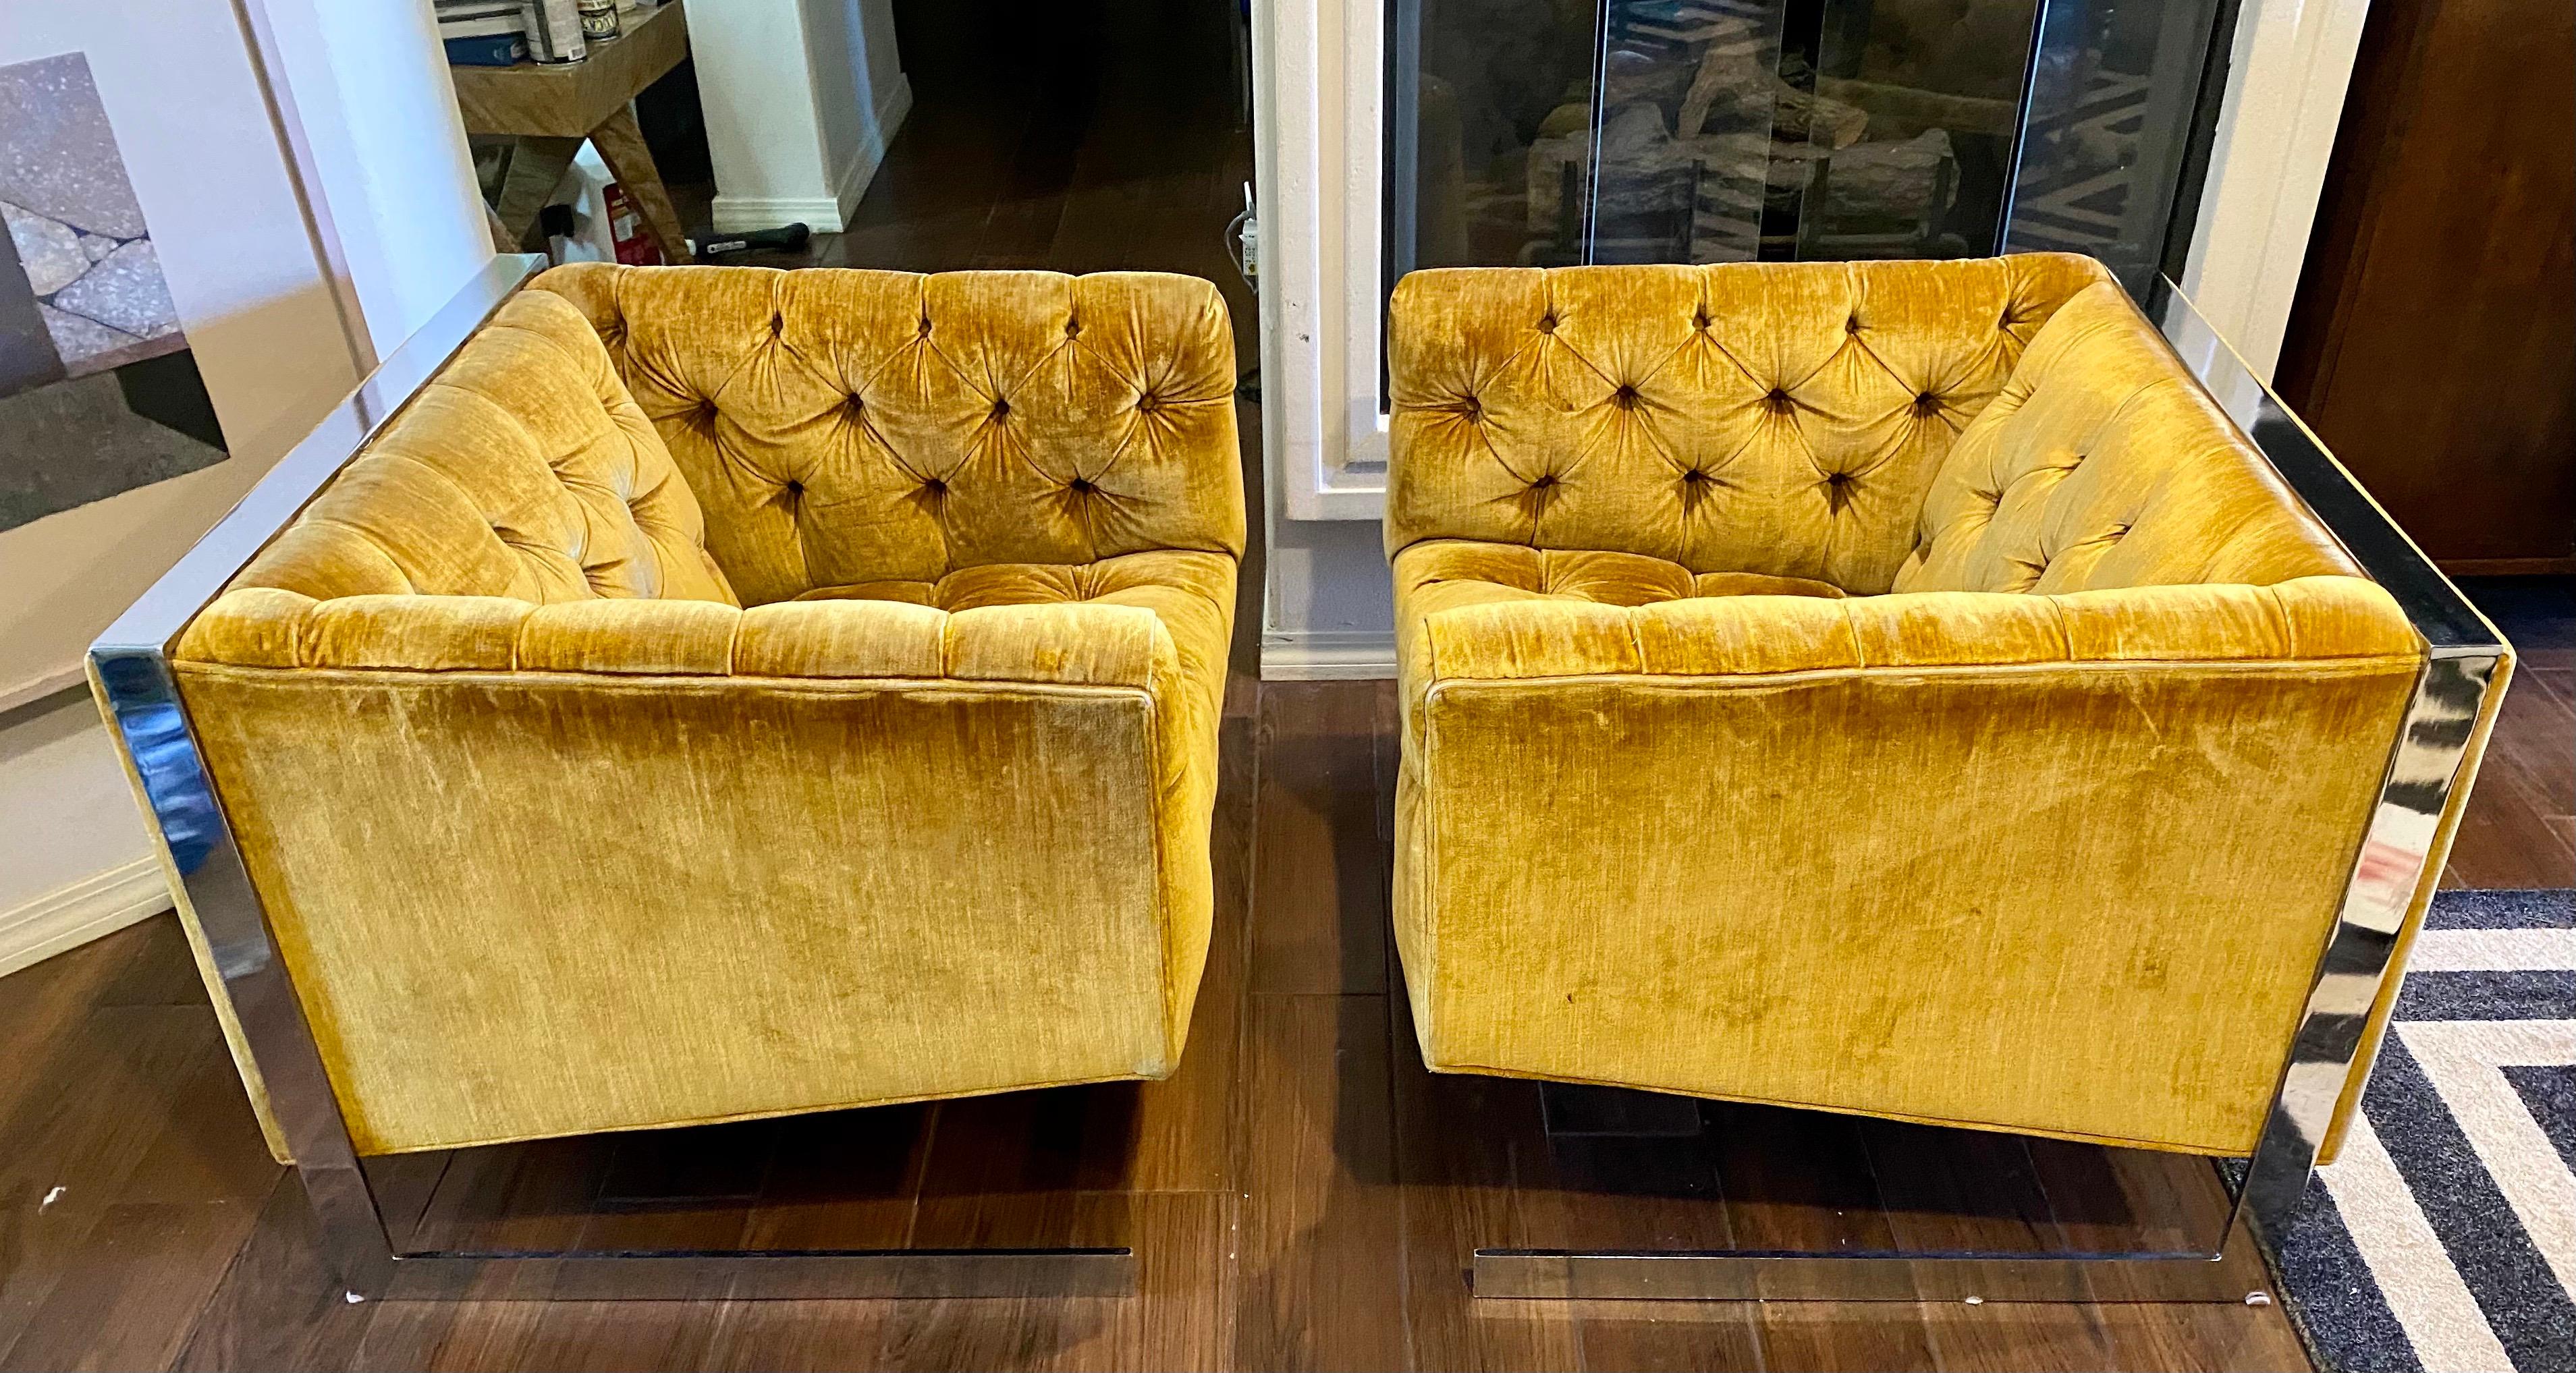 These vintage Italian modern chairs are a work of art. They obtain their original antique velvet in beautiful gold color. The fabric is not in perfect condition but adds to the vintage beautiful patina of these chairs. The only noticeable flaw is